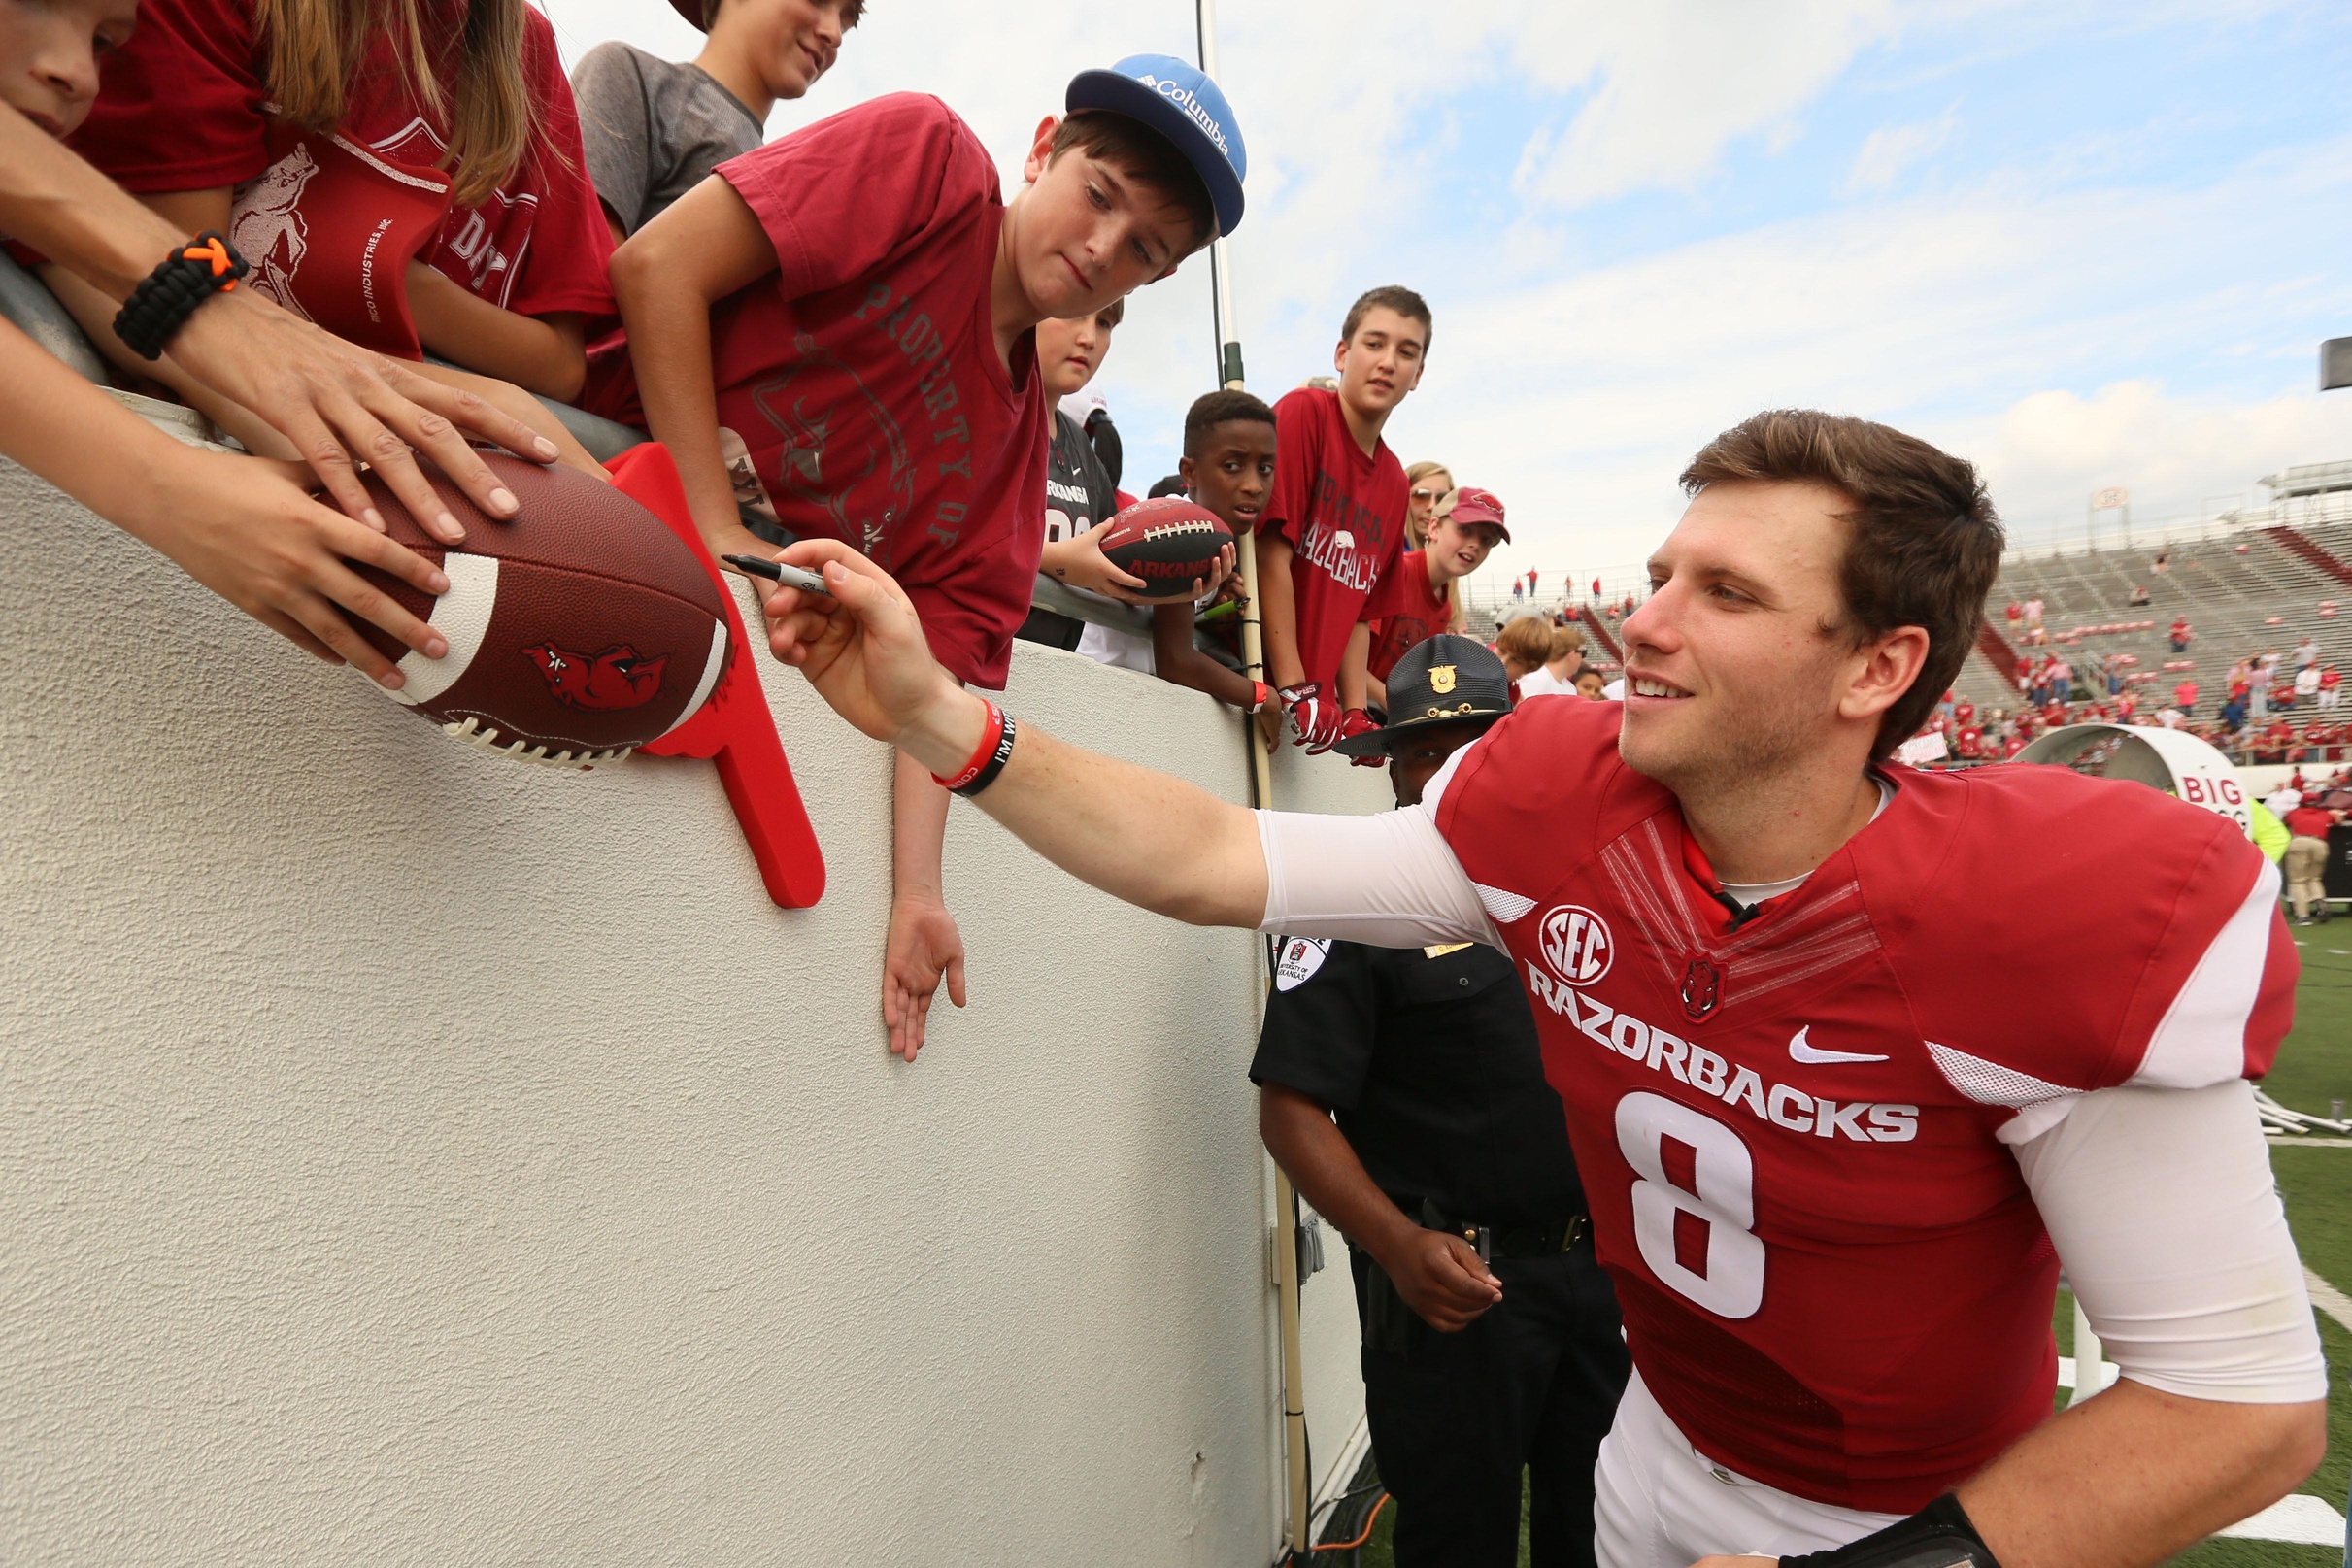 Oct 1, 2016; Little Rock, AR, USA; Arkansas Razorbacks quarterback Austin Allen (8) signs autographs for fans following the game against the Alcorn State Braves at War Memorial Stadium. Arkansas defeated Alcorn State 52-10. Mandatory Credit: Nelson Chenault-USA TODAY Sports